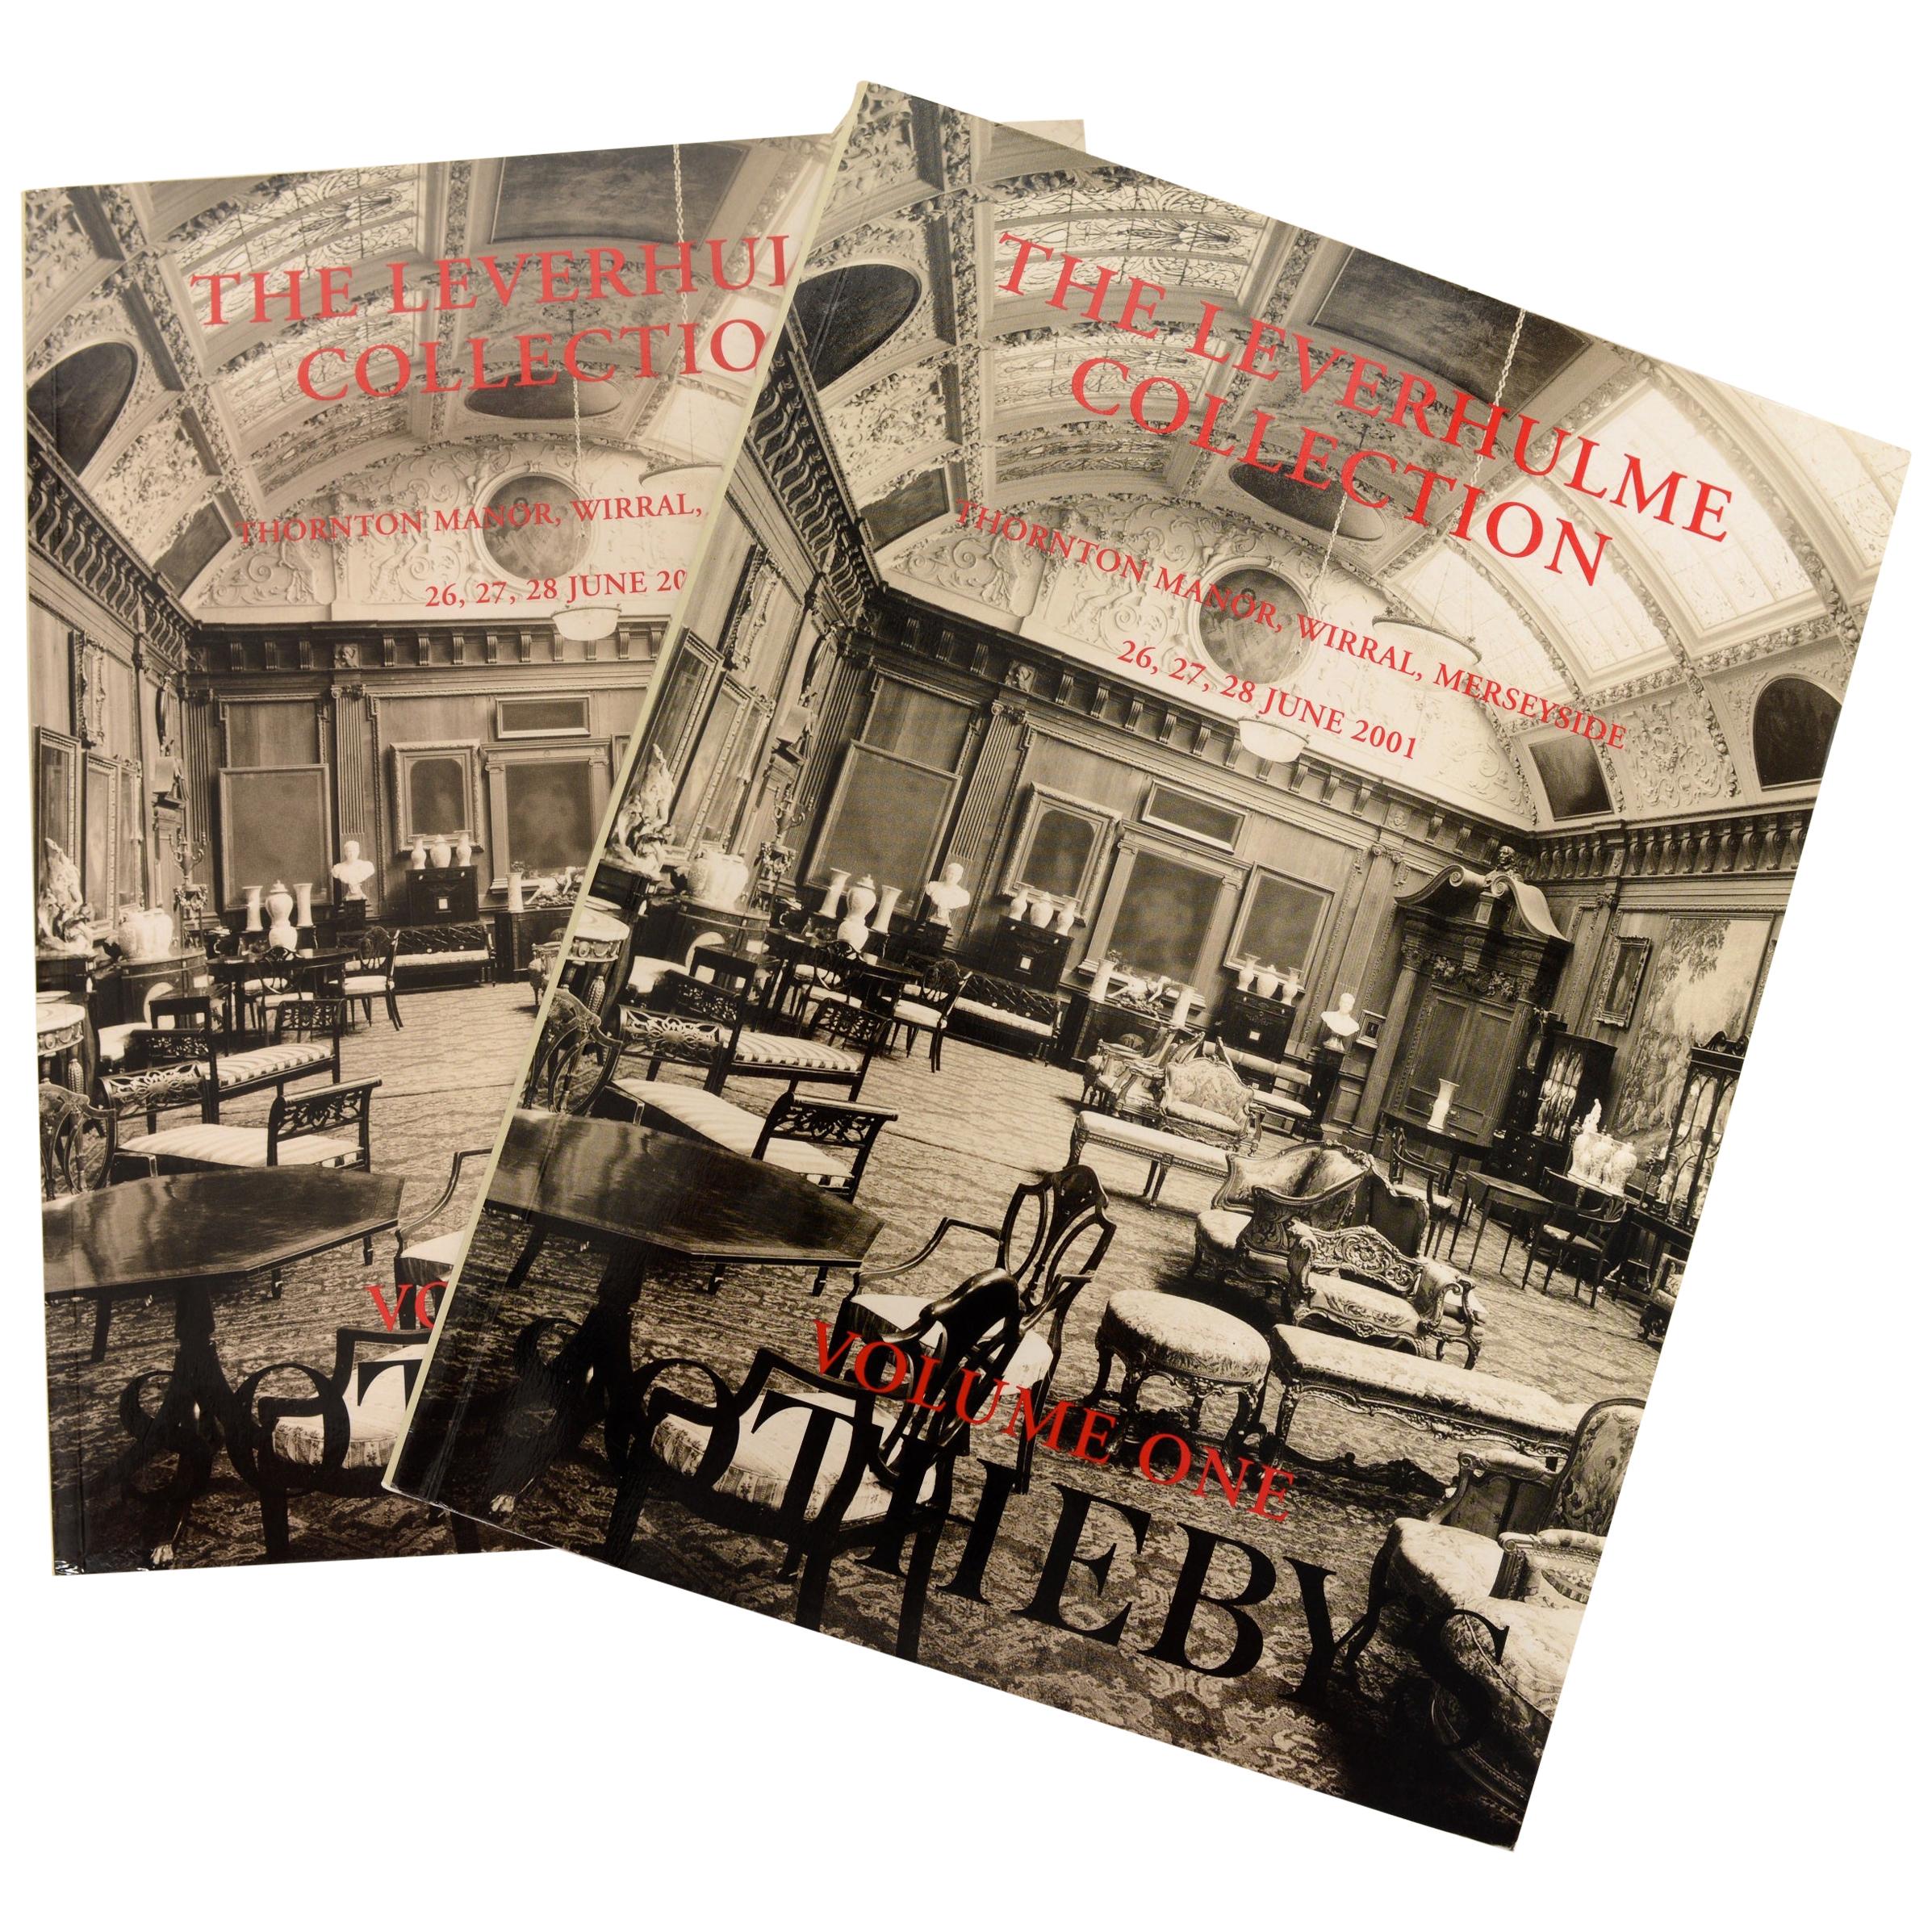 The Leverhulme Collection Thornton Manor, Wirral Merseyside, Vol One and Two